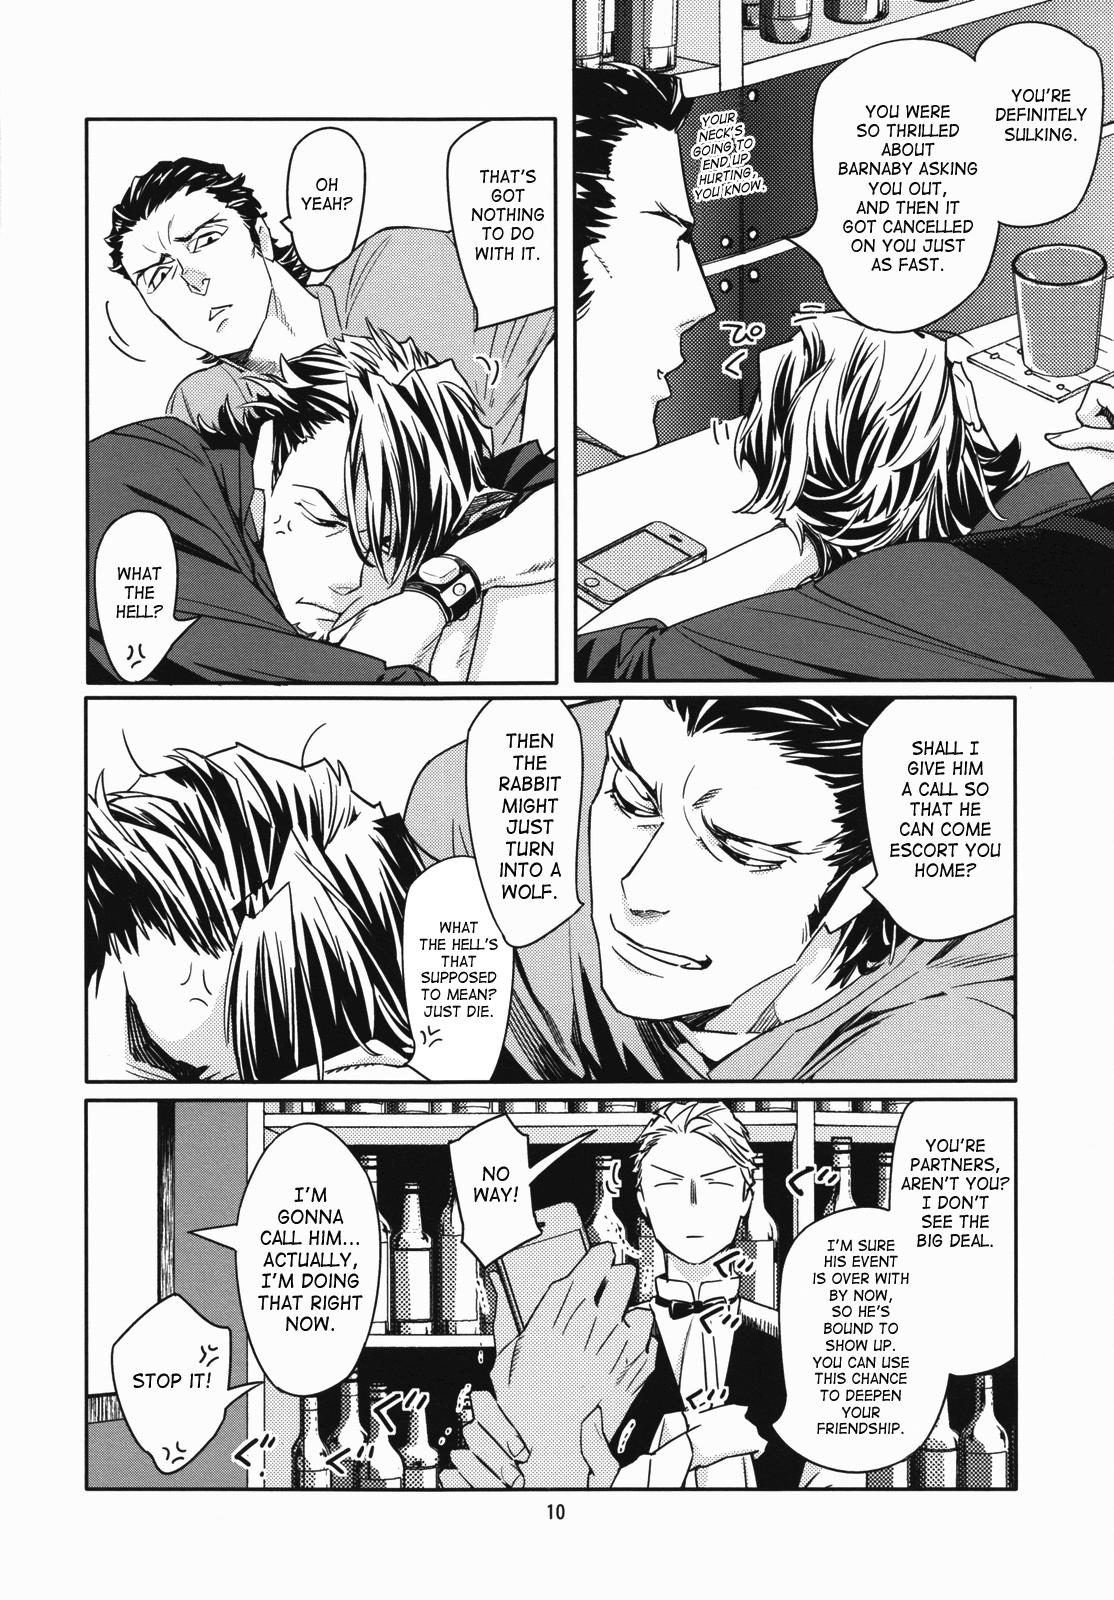 Grande CANDY MAN - Tiger and bunny Transvestite - Page 9